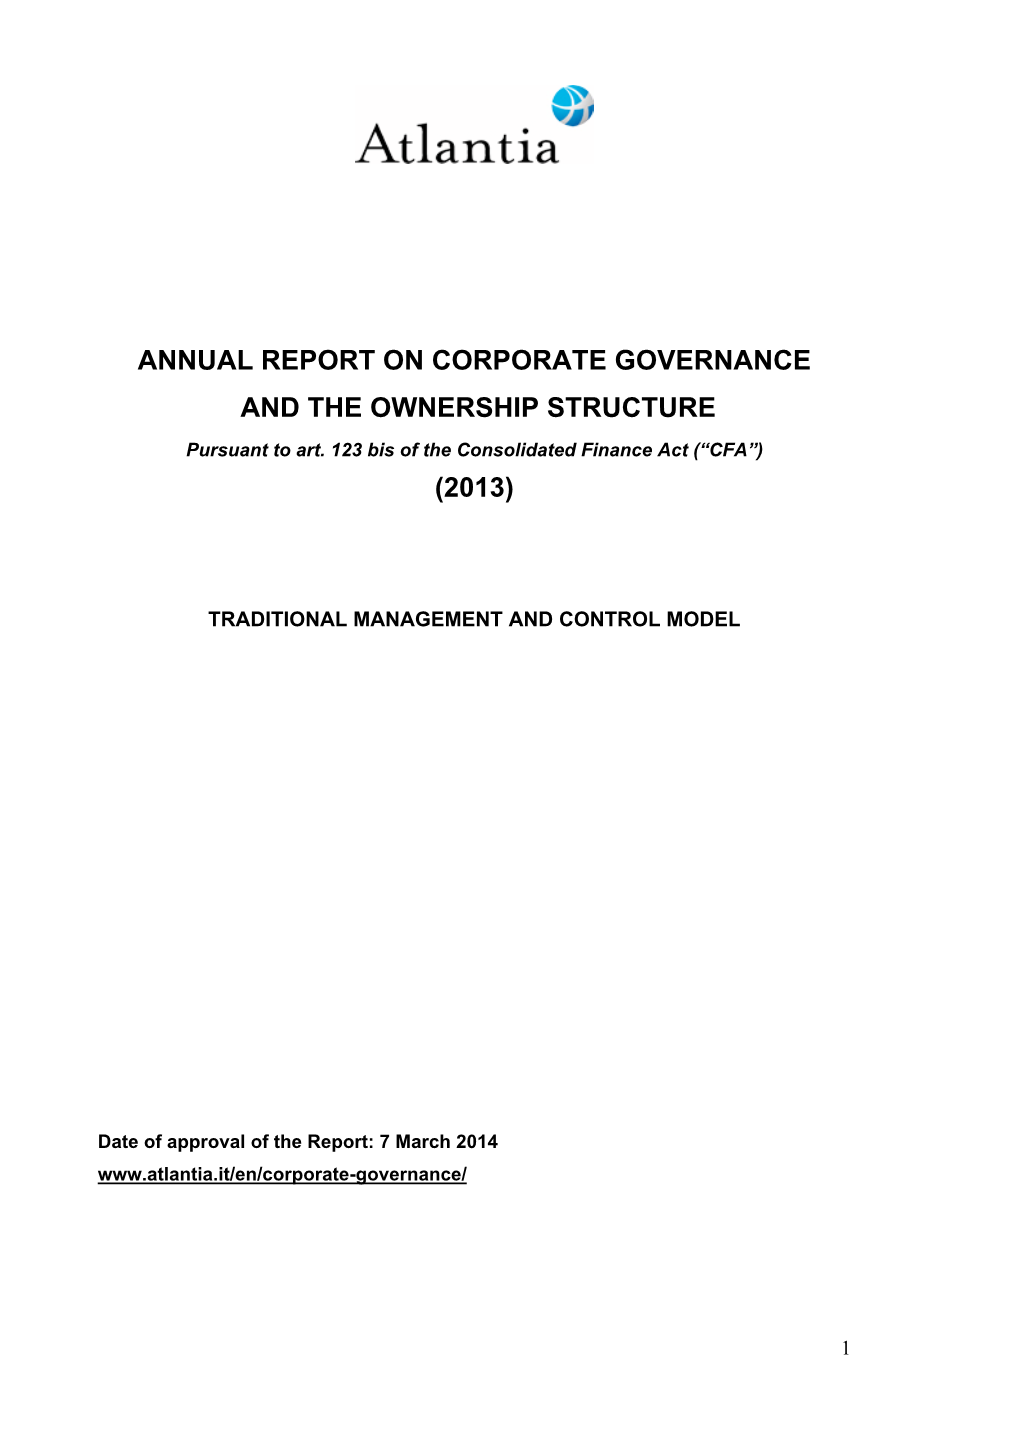 ANNUAL REPORT on CORPORATE GOVERNANCE and the OWNERSHIP STRUCTURE Pursuant to Art